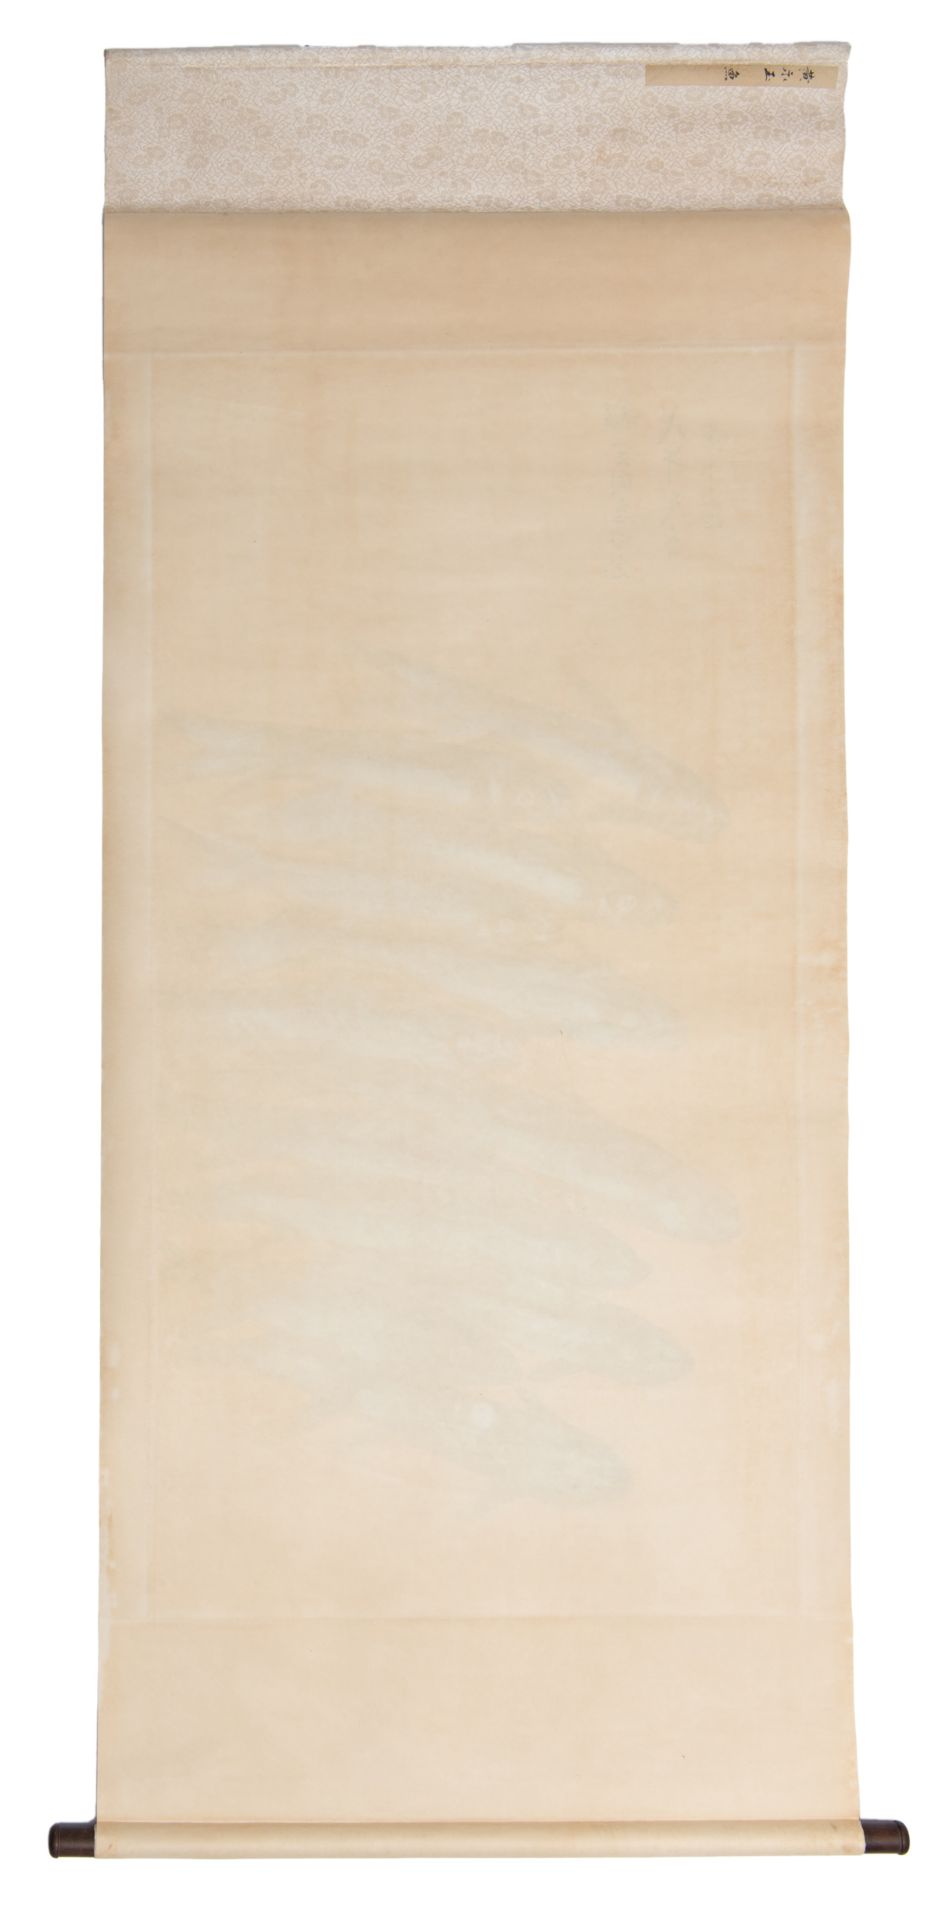 A scroll depicting a shoal of fish, signed, 69,5 x 138 (without frame) - 80,5 - 191 cm (with frame) - Bild 3 aus 3